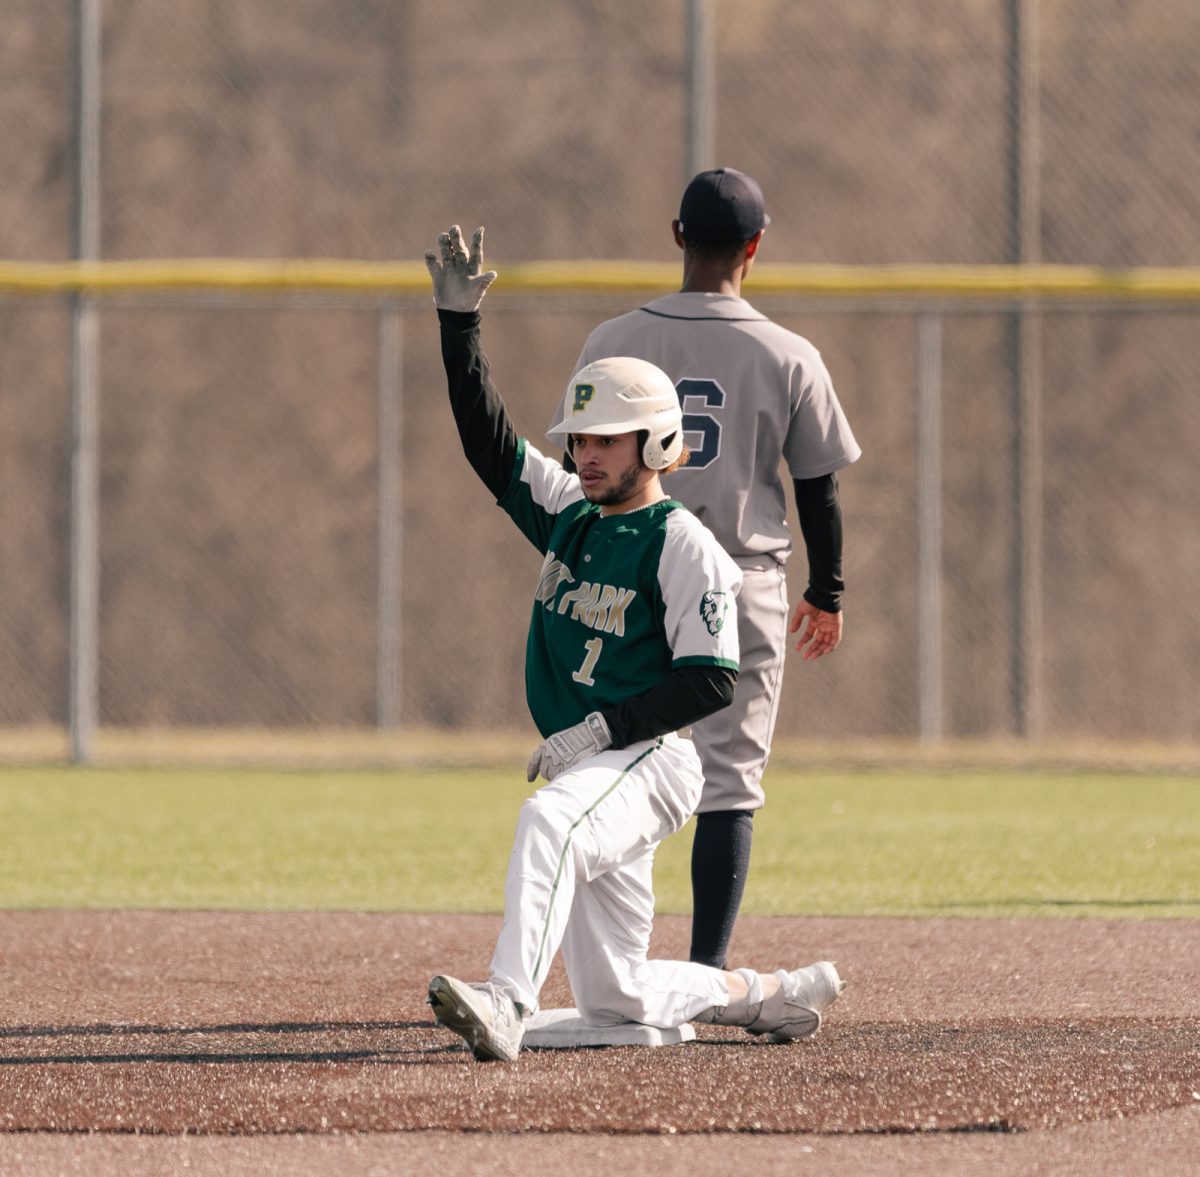 Omar Morillo celebrating a base hit in the opening day game against Fisher.